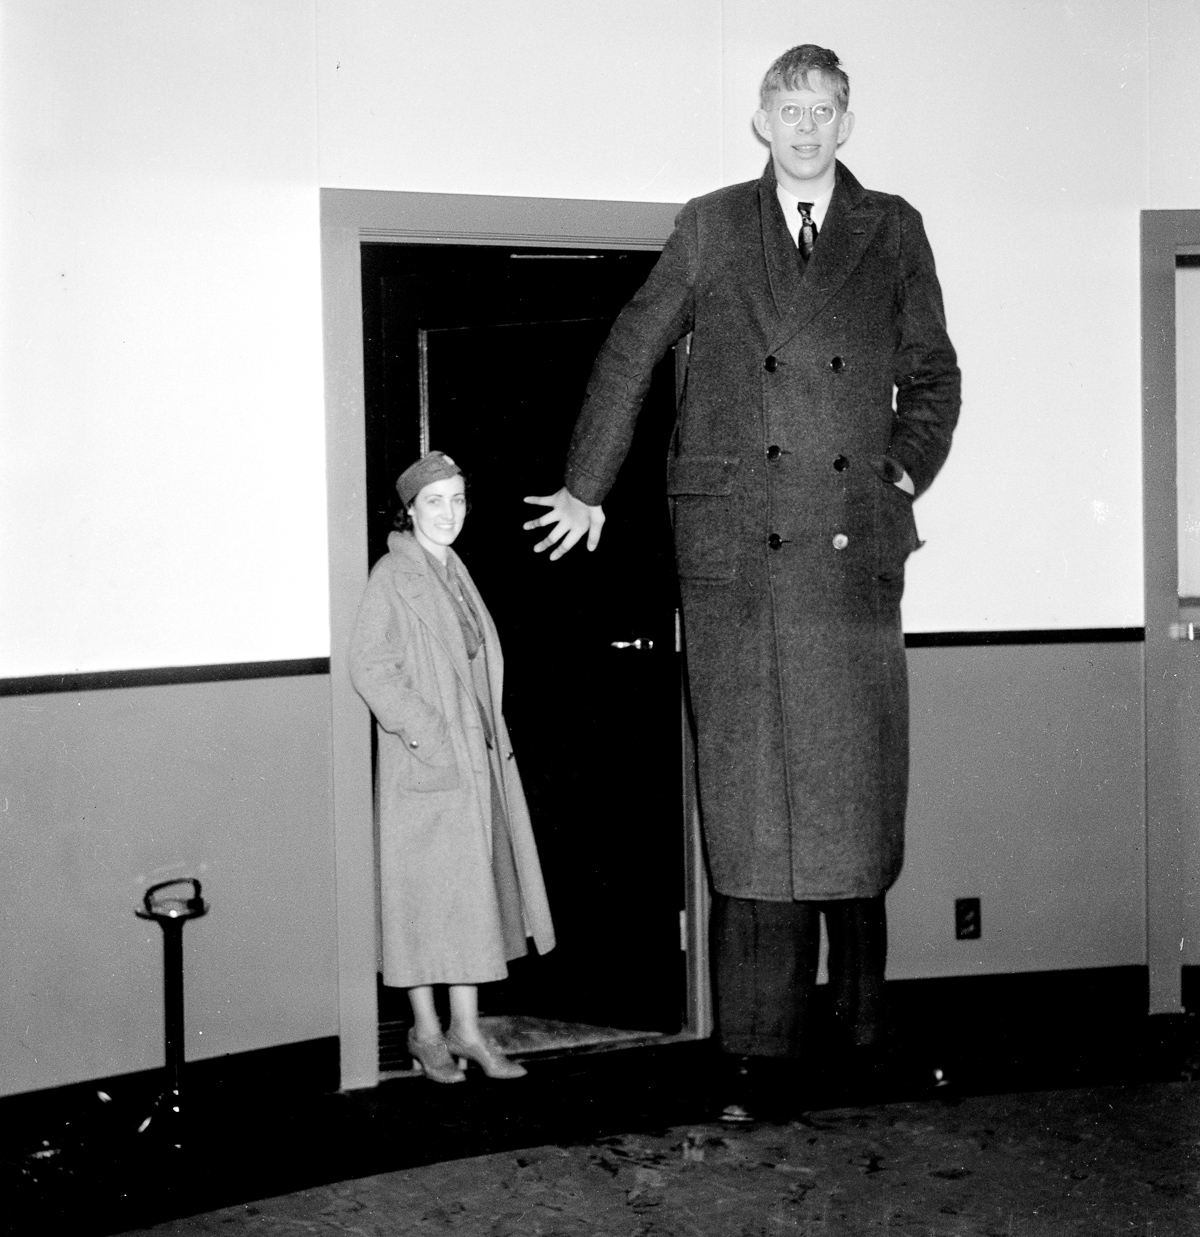 This was the tallest man in history